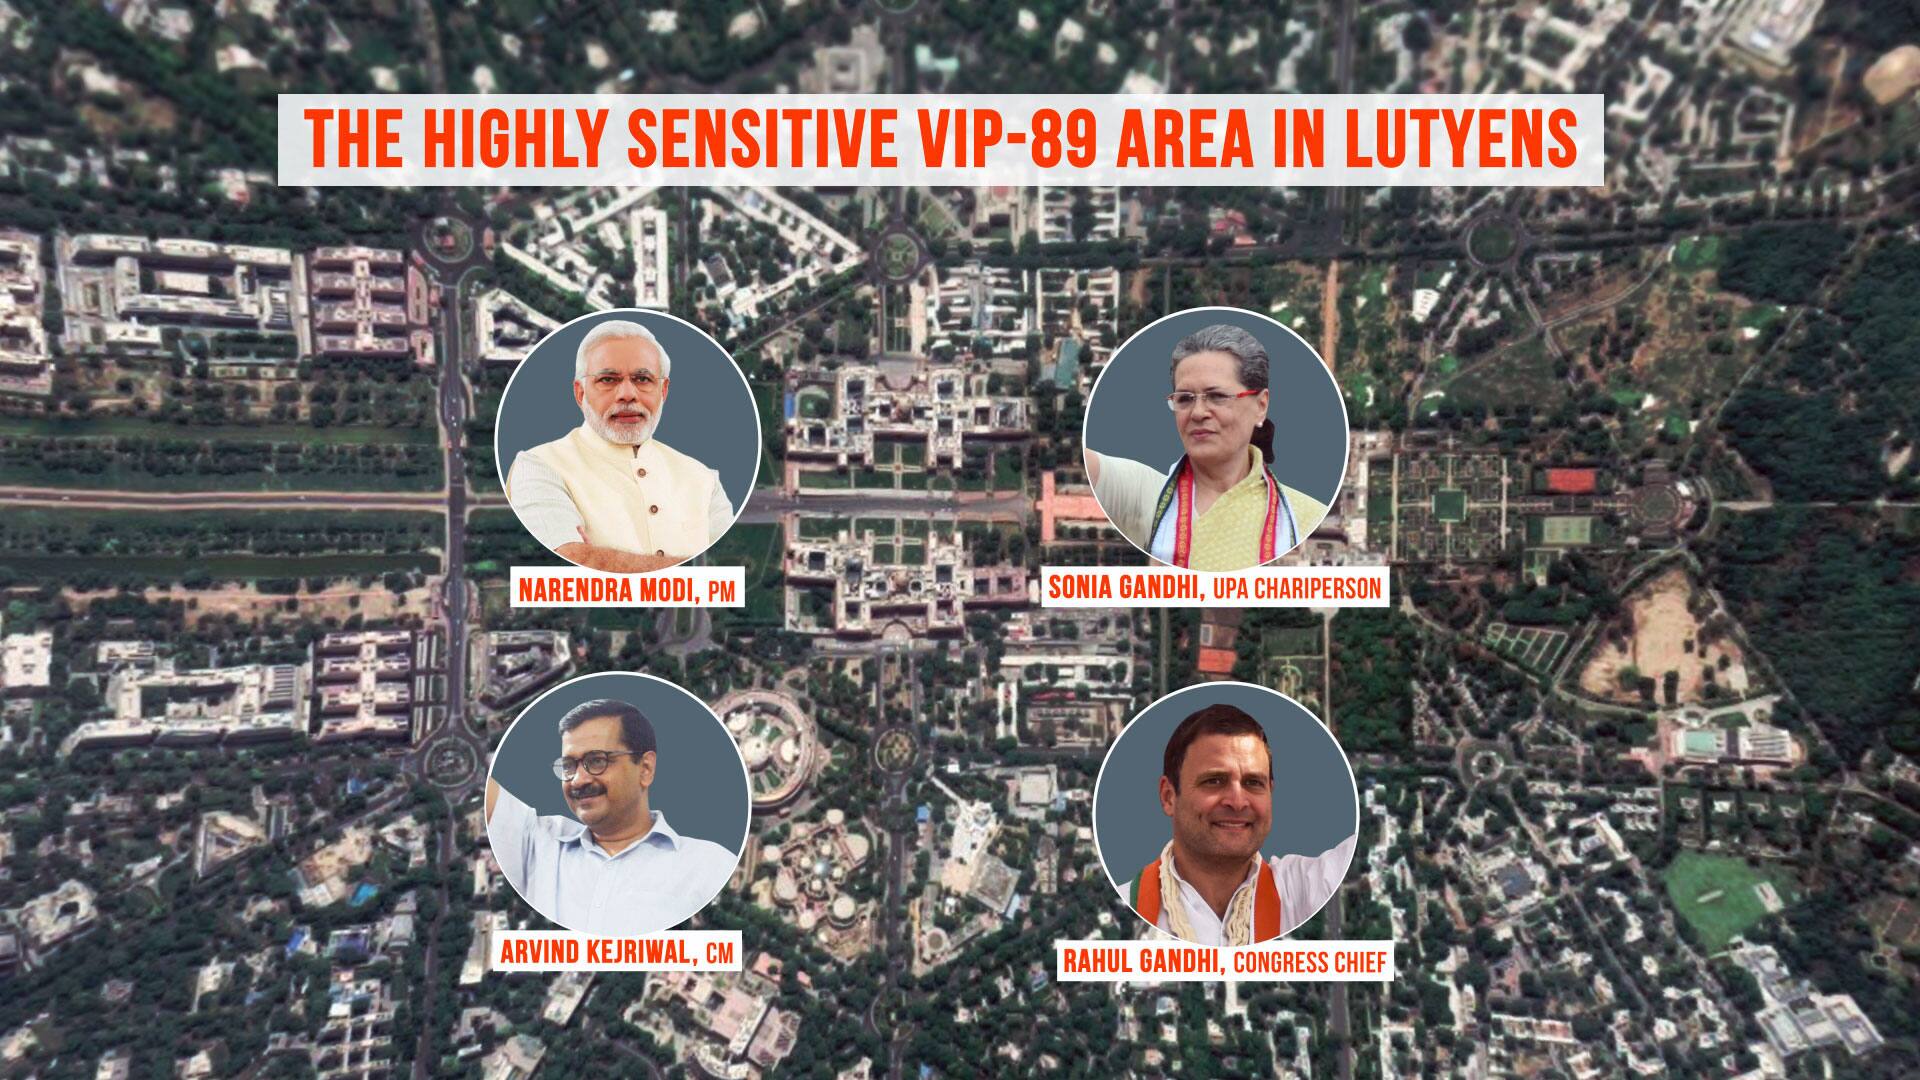 Secret plan to protect Lutyen's VIP-89 area from aerial, chemical attacks